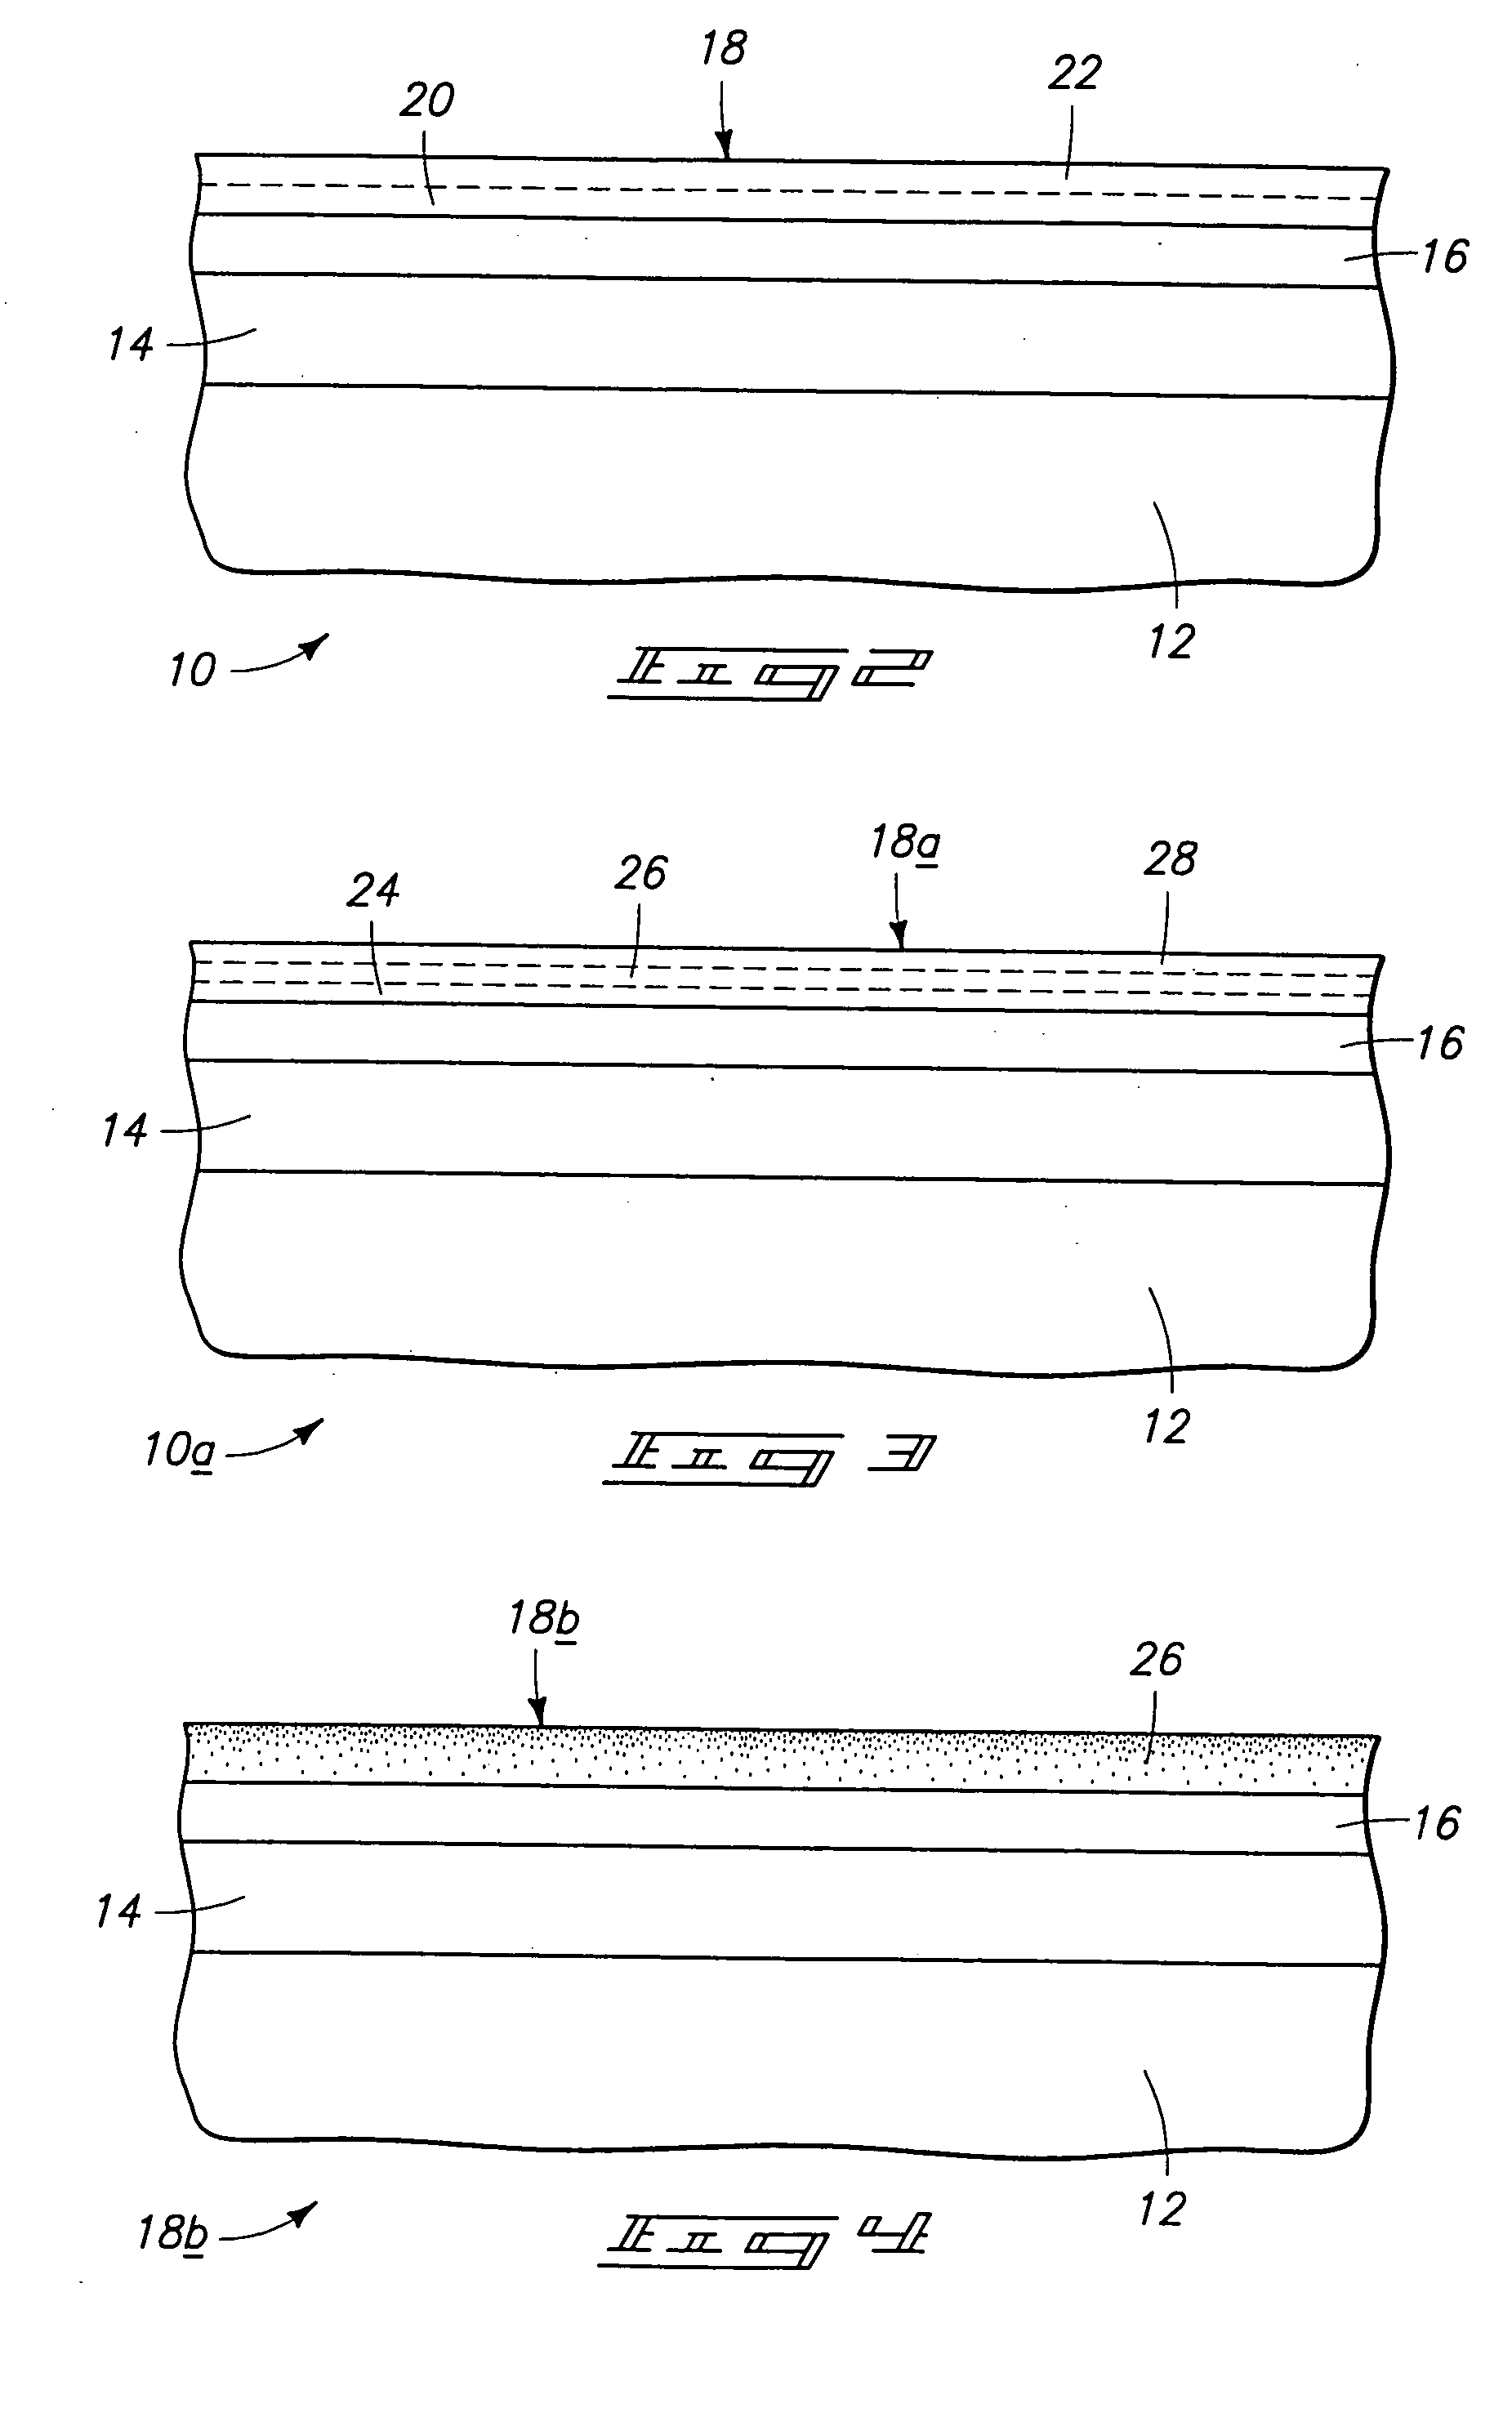 Method of forming a capacitor